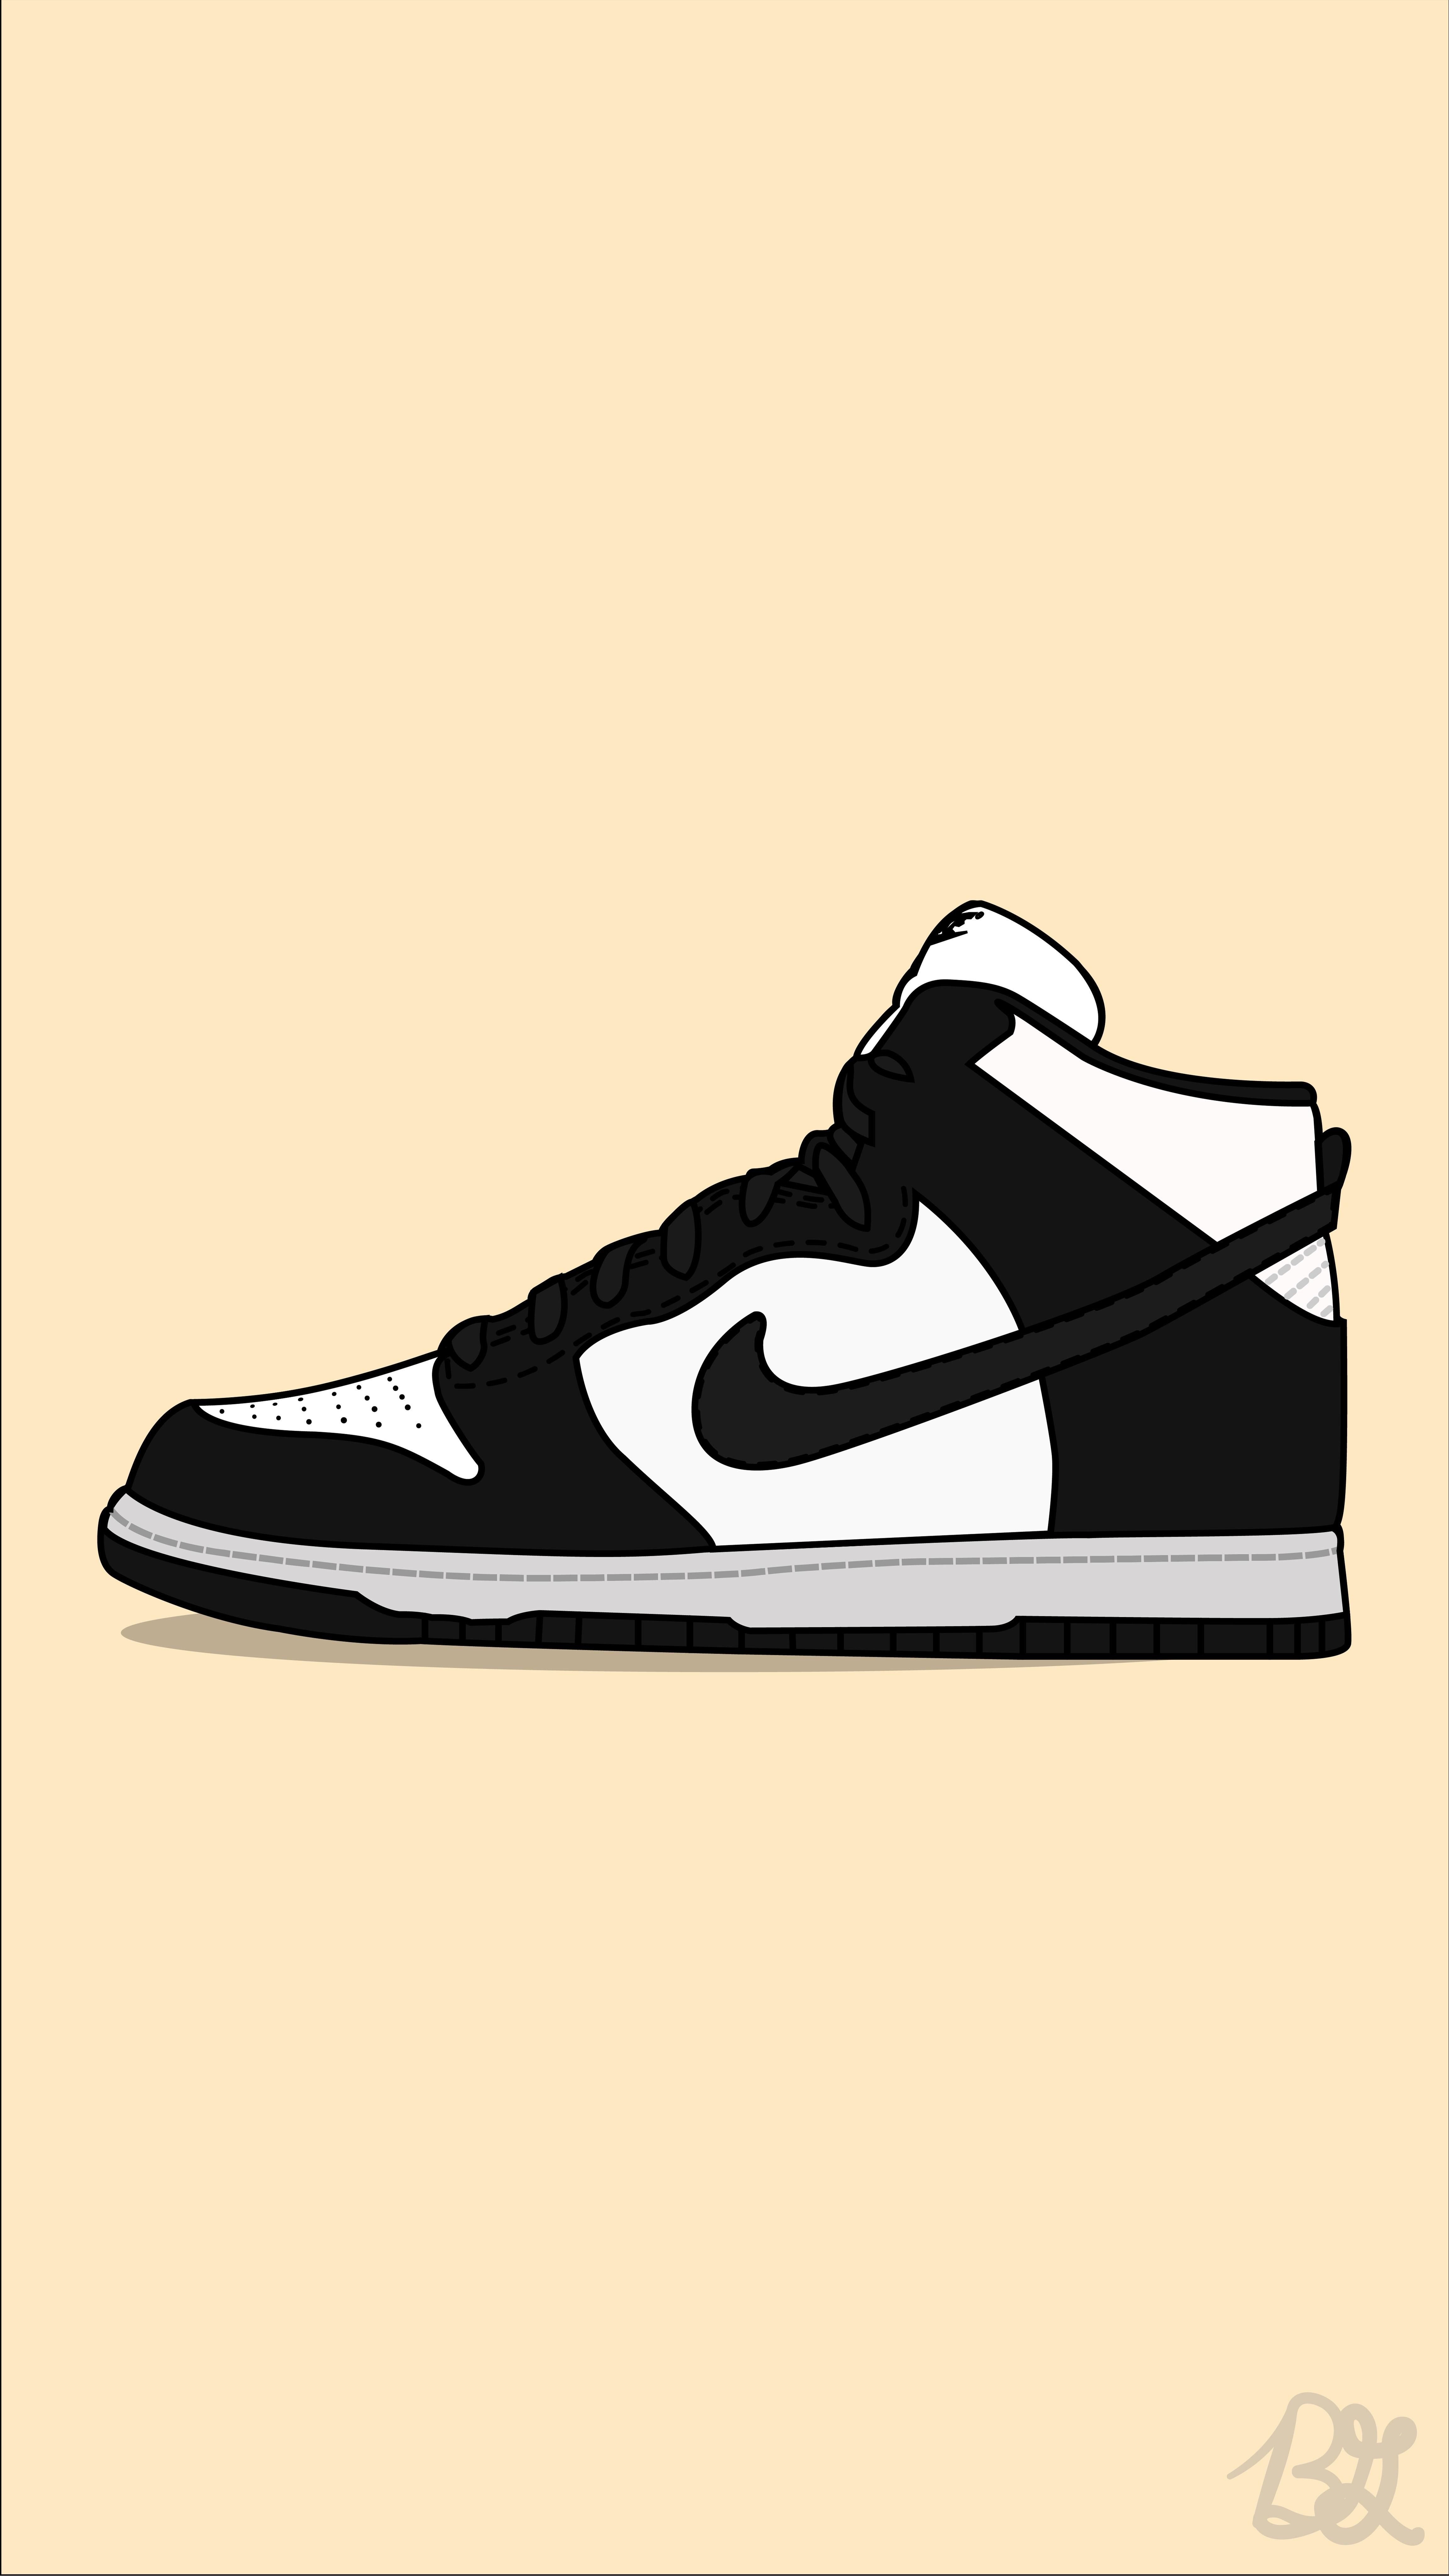 1080p Phone Wallpaper Of Nike Dunk Sneakers Illustration Shoes